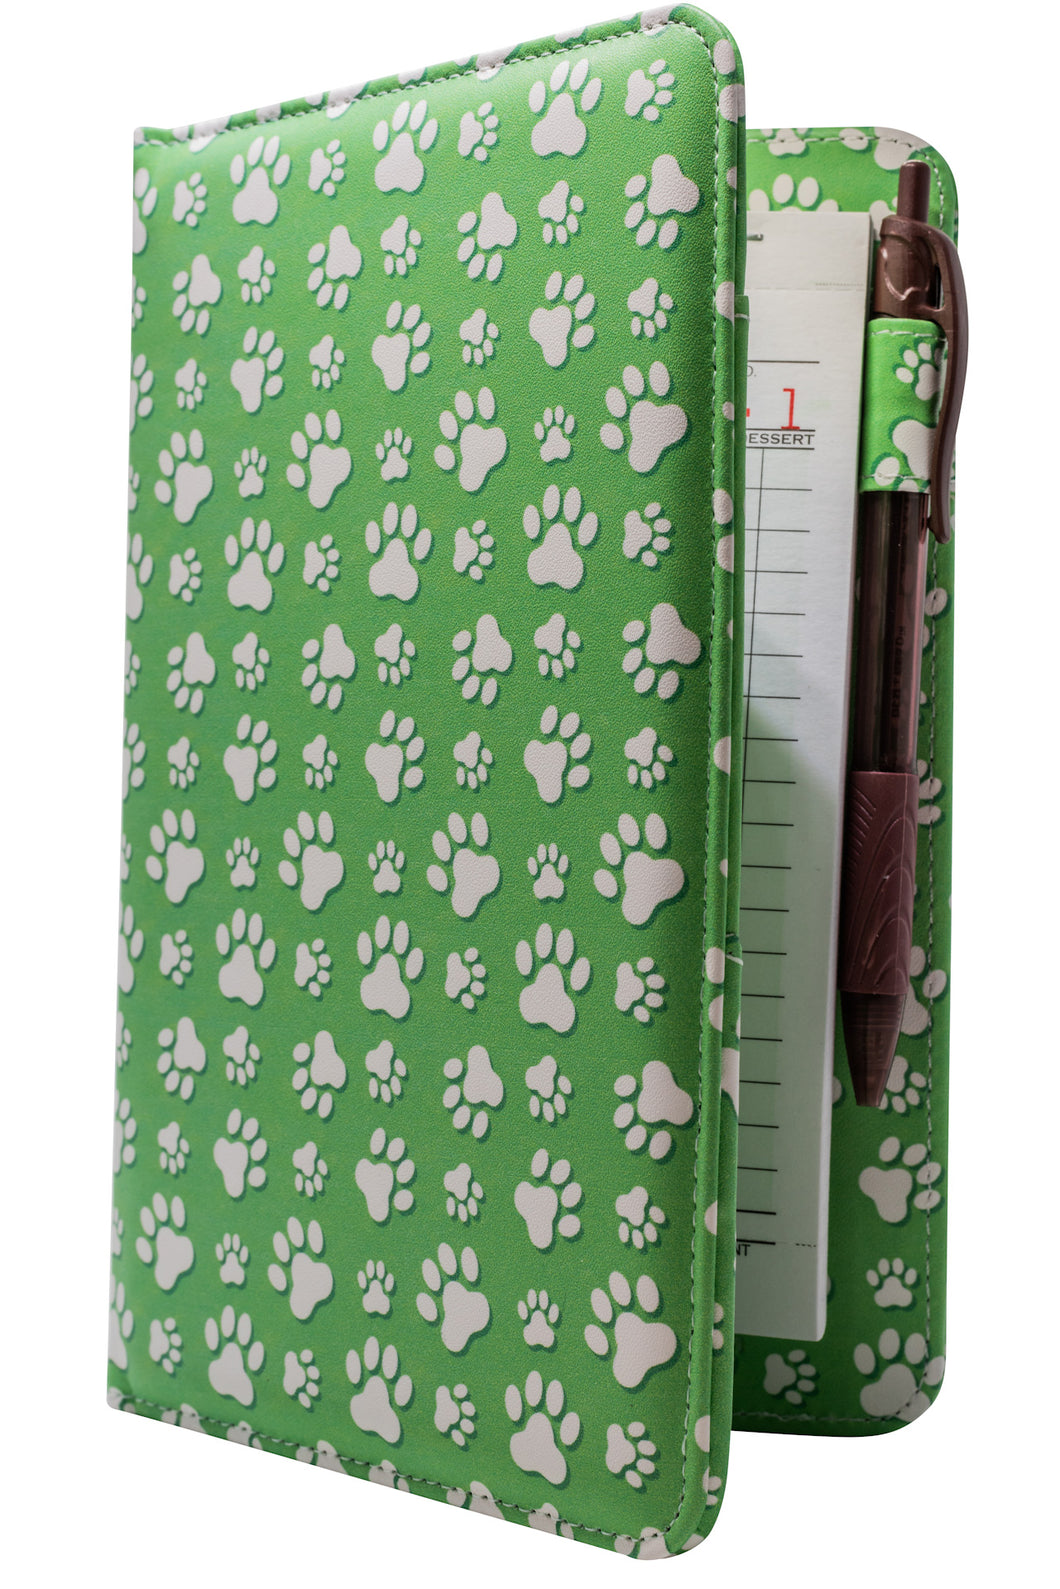 Cute Green Paw Print Server Book for Animal Lovers Gift Idea for Waitresses